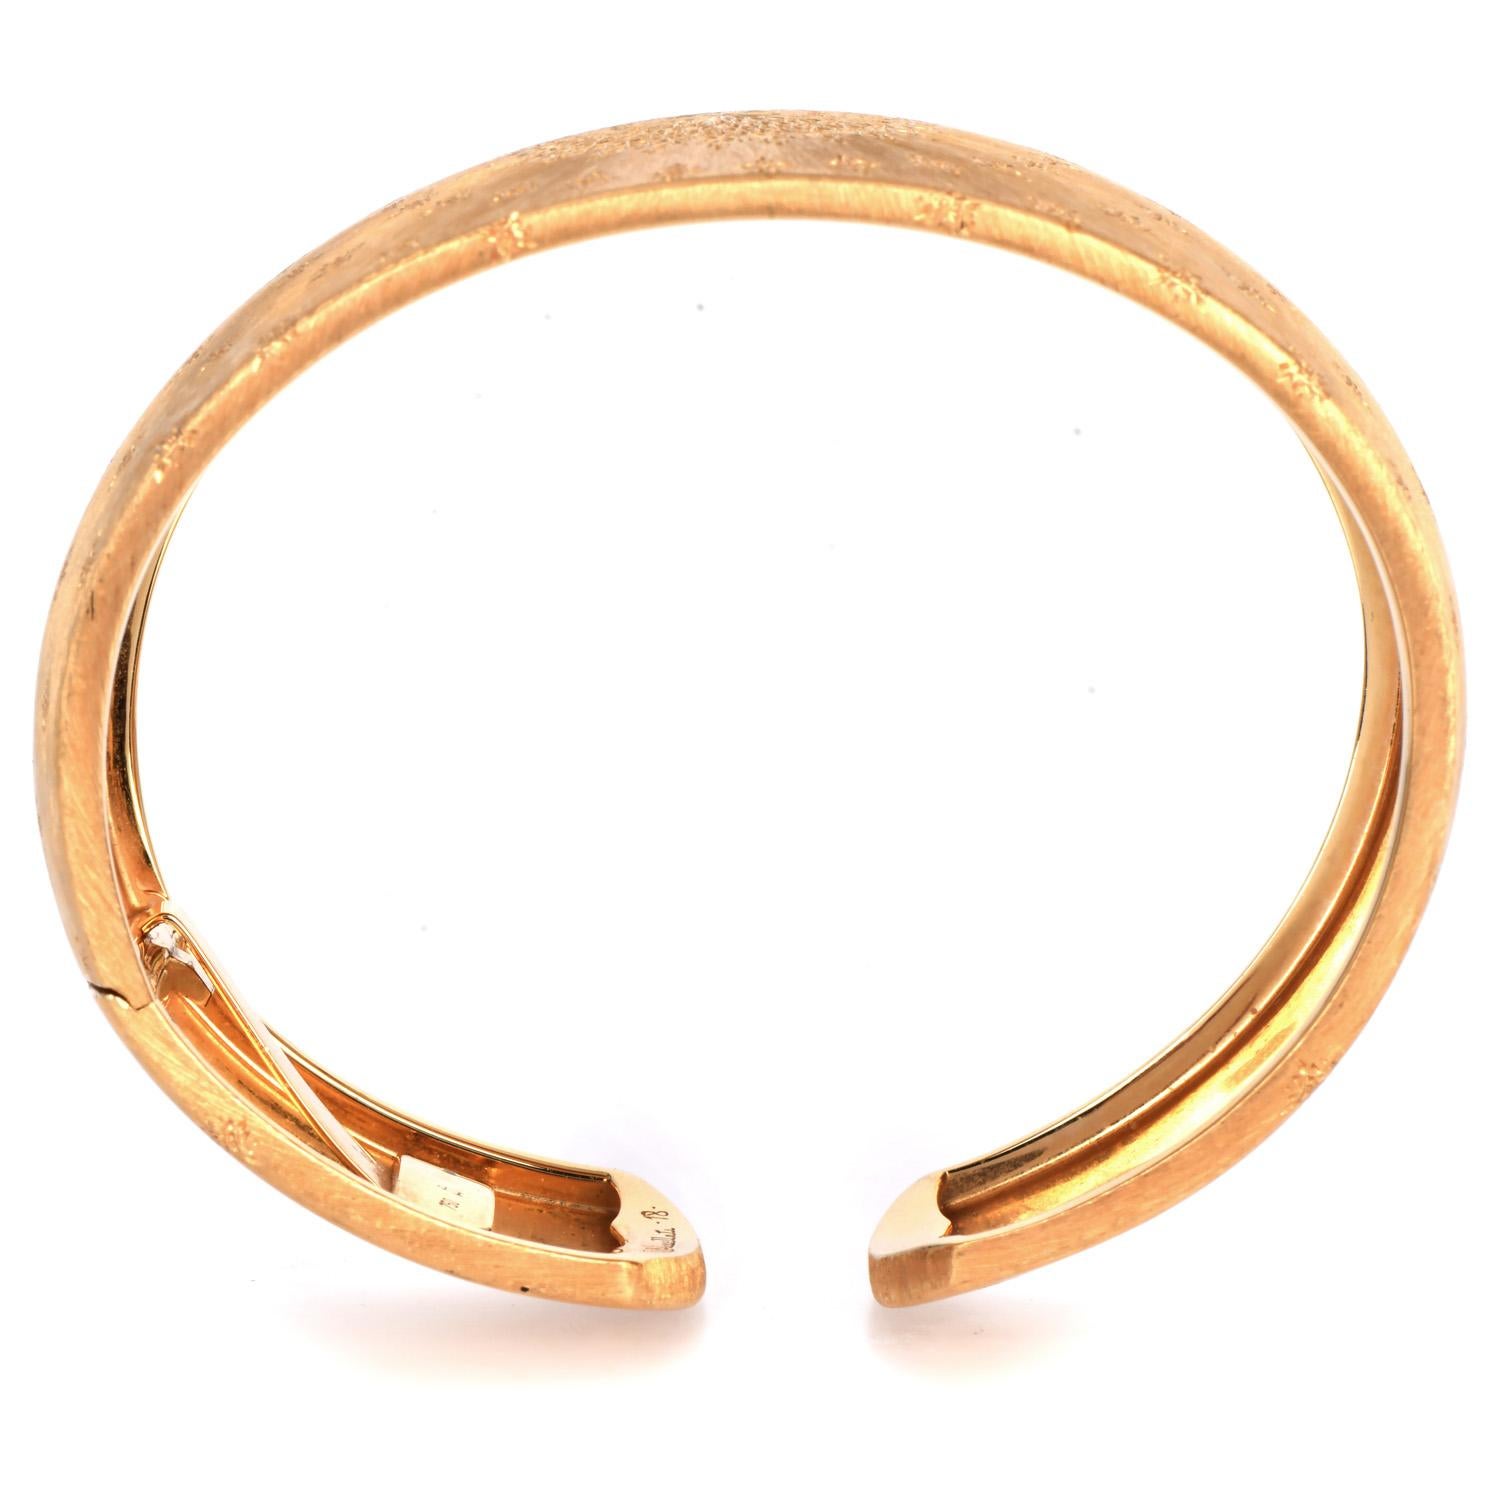 Vintage Buccellati 18K Gold Wide Satin Engraved Cuff Bracelet In Excellent Condition For Sale In Miami, FL